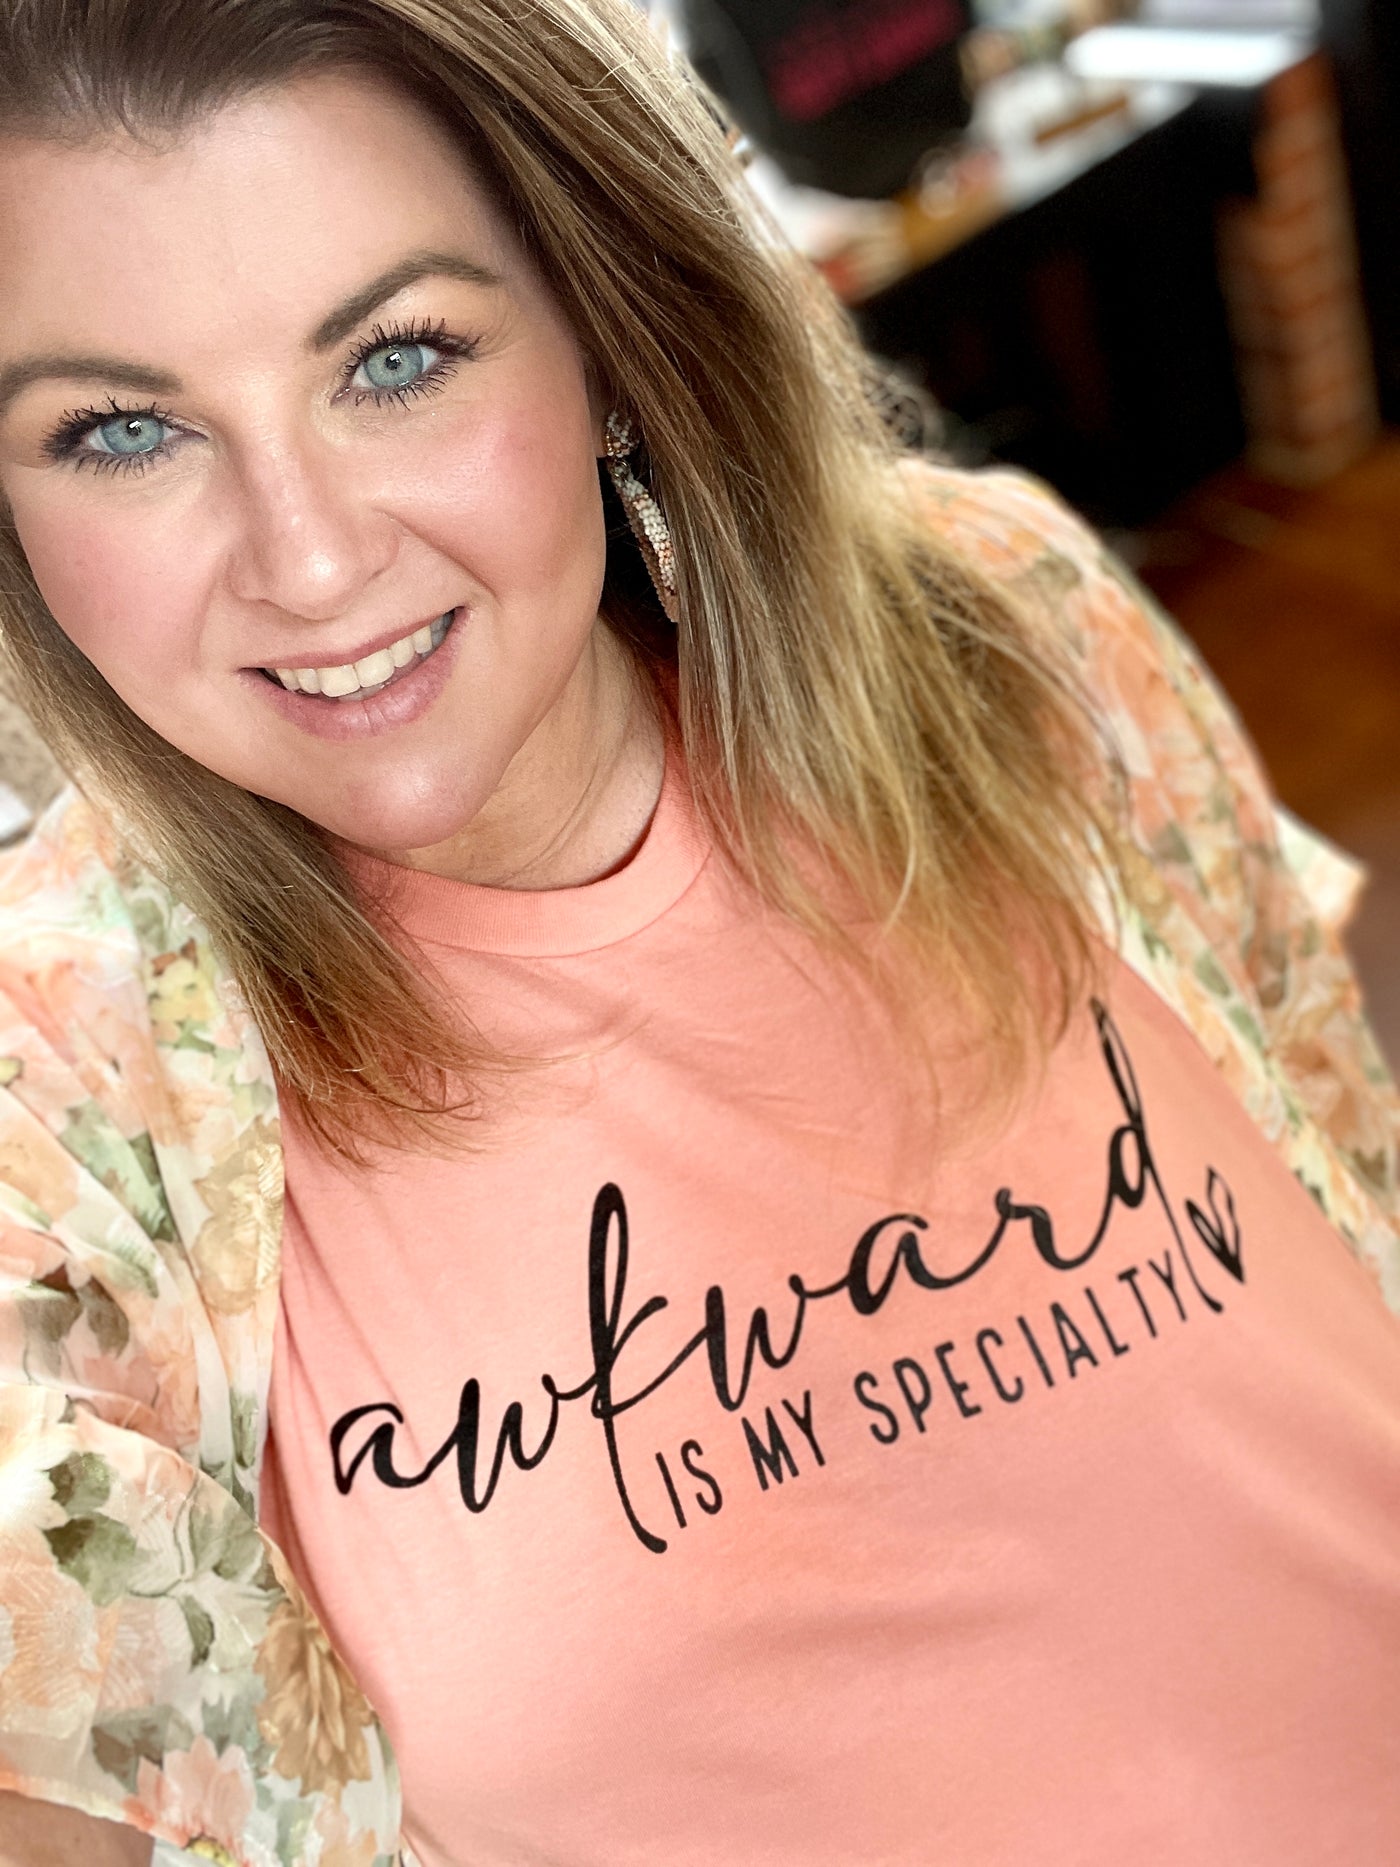 Awkward Is My Specialty Graphic Tee-Harps & Oli-Shop Anchored Bliss Women's Boutique Clothing Store